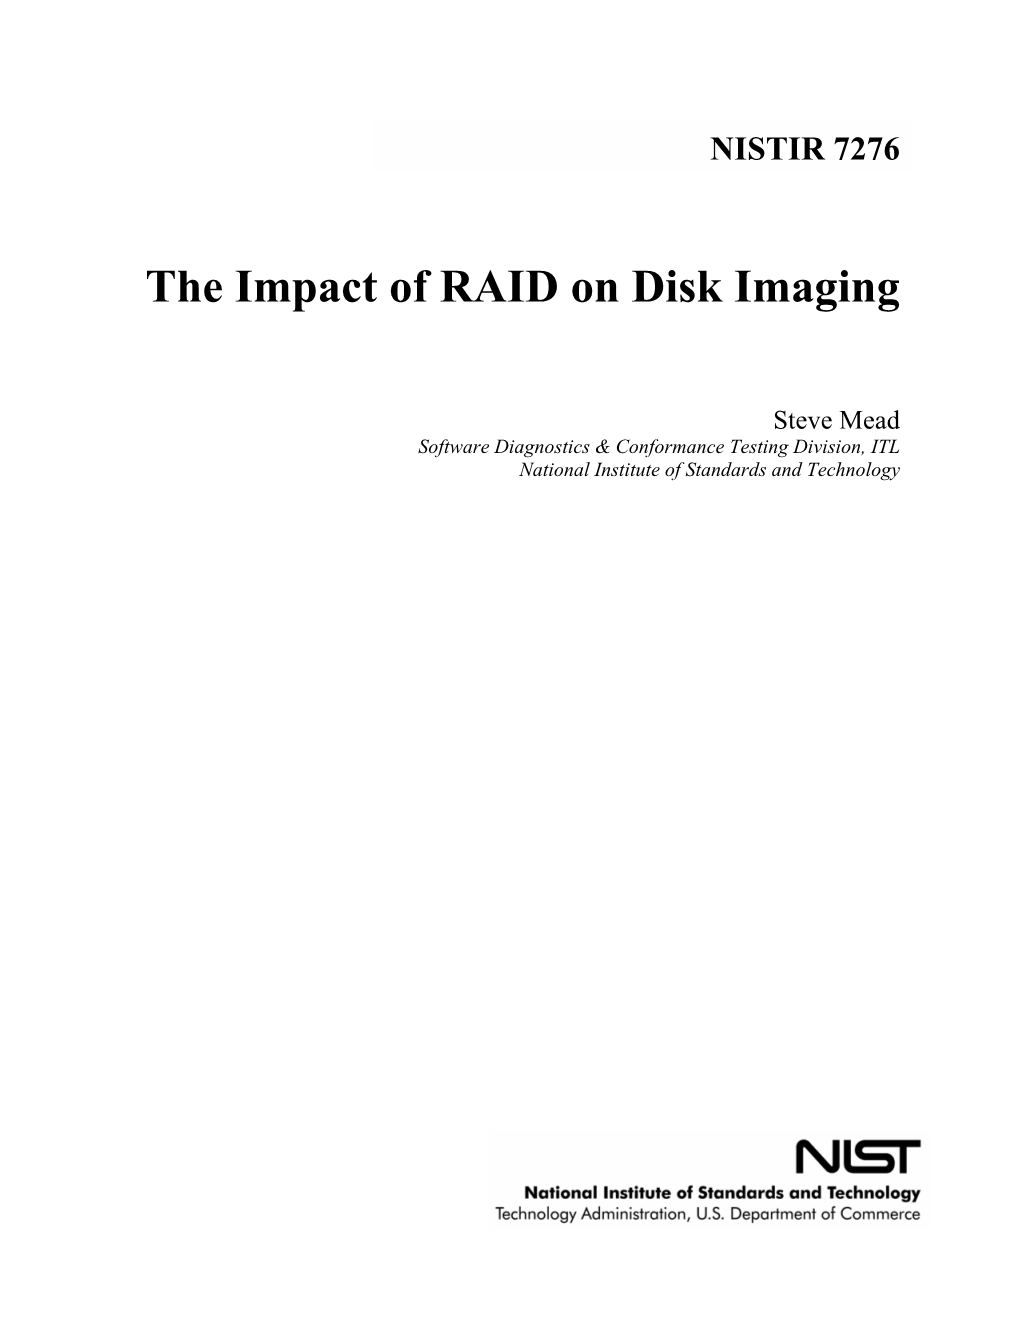 The Impact of RAID on Disk Imaging